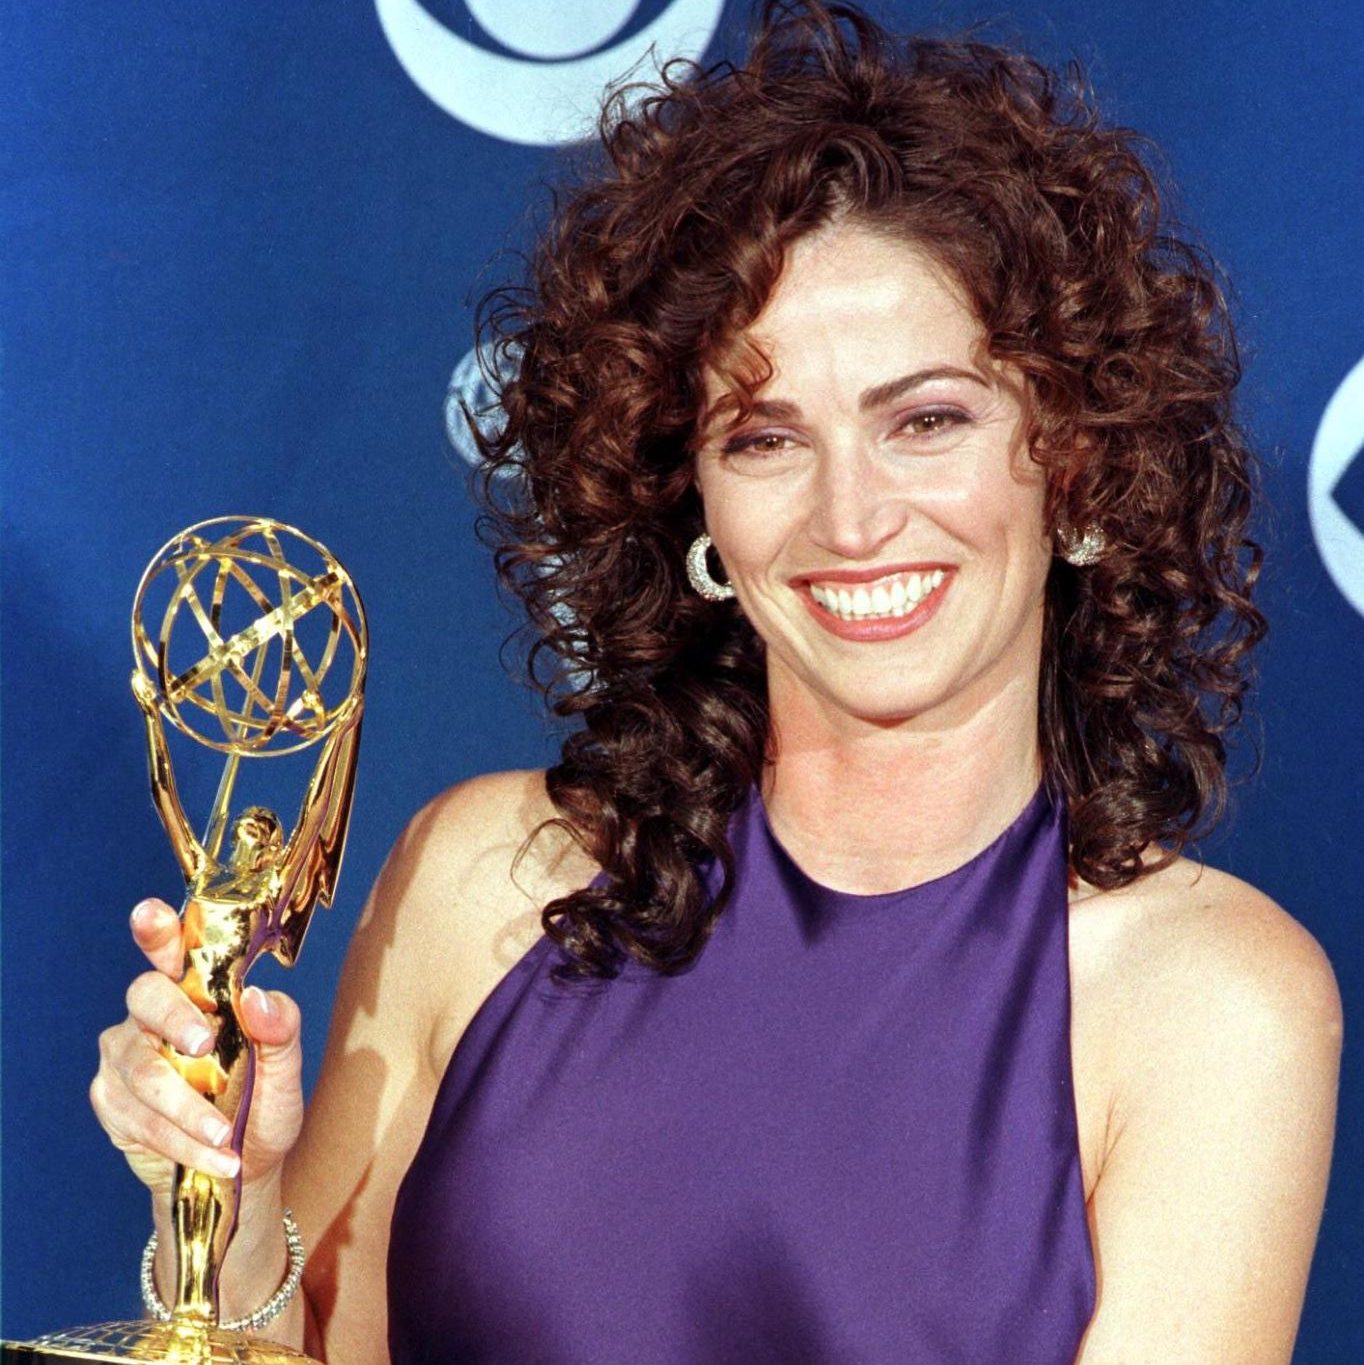 Kim Delaney poses with her Emmy Award for NYPD Blue, 1997